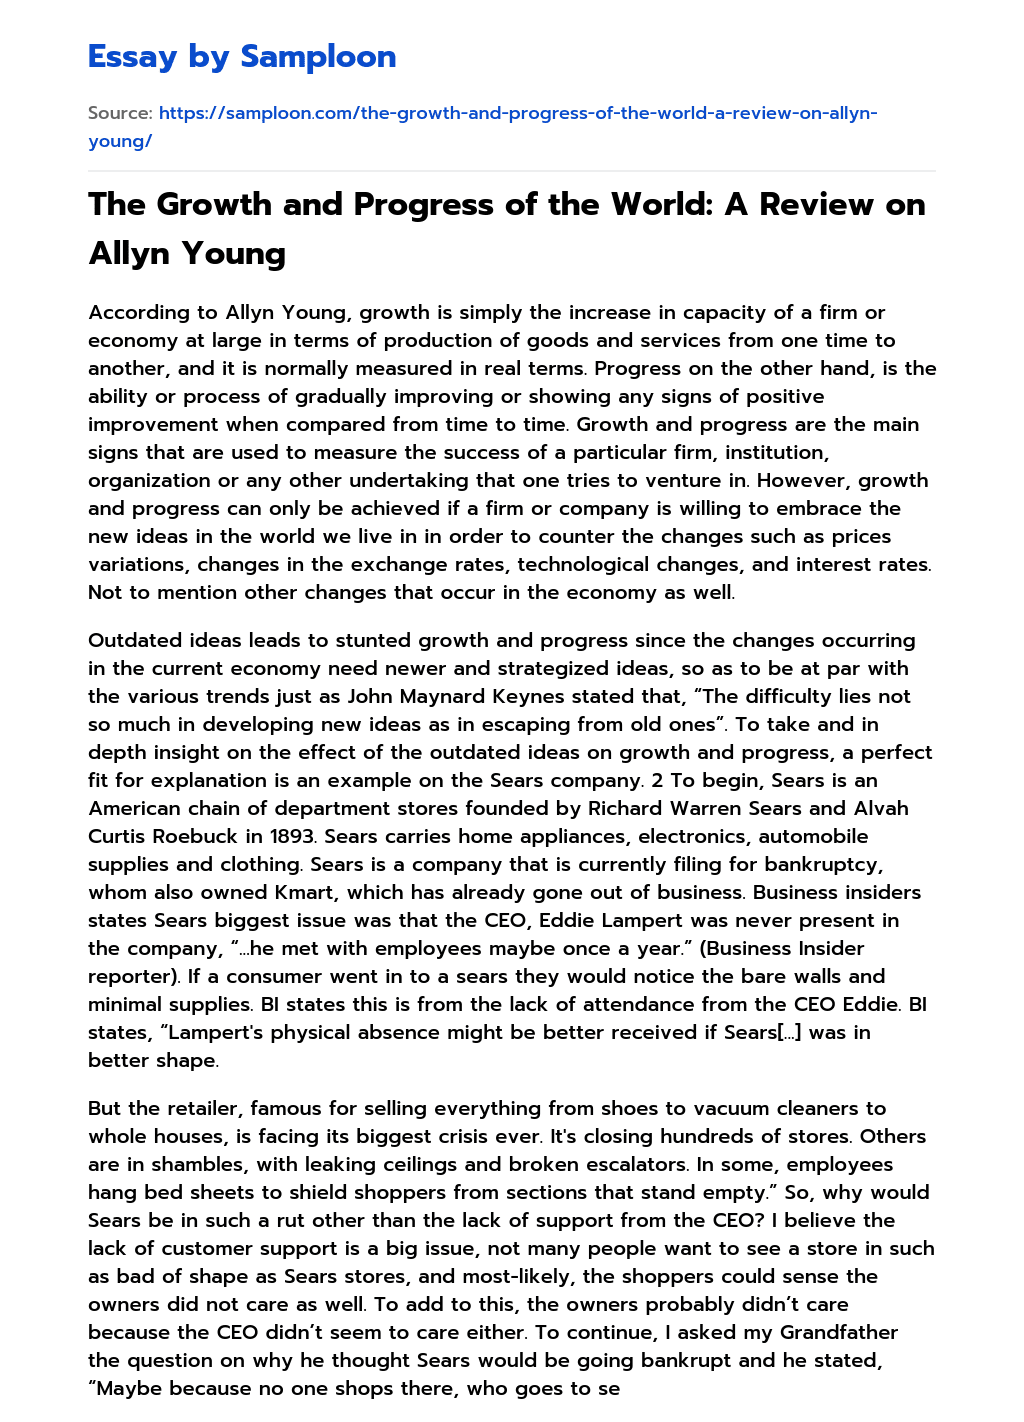 The Growth and Progress of the World: A Review on Allyn Young essay